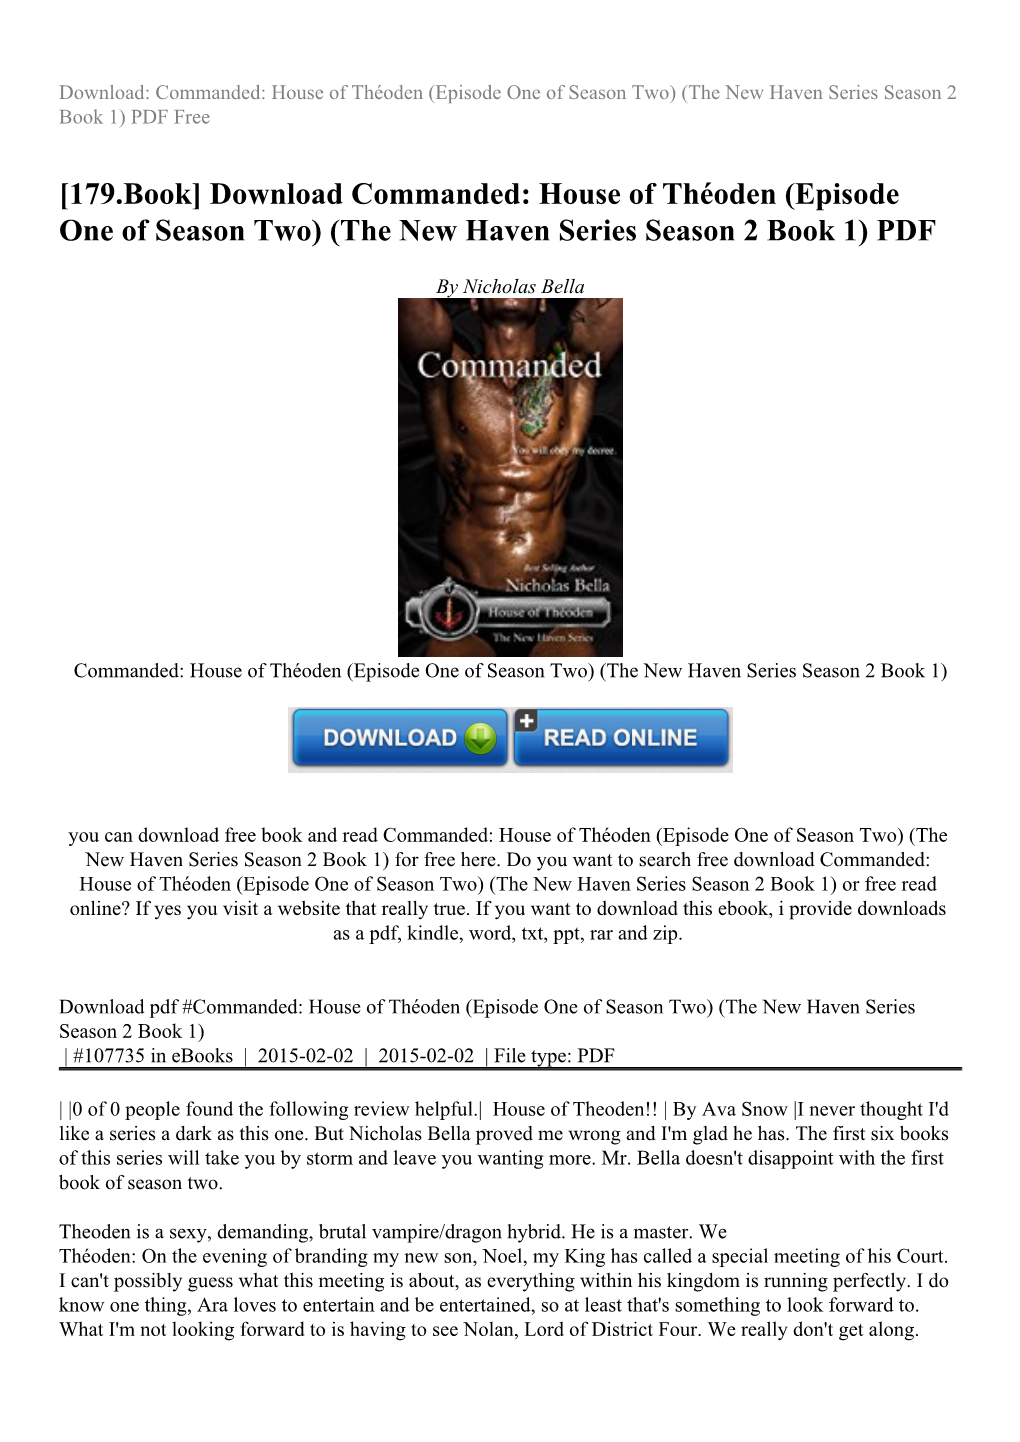 Download Commanded: House of Théoden (Episode One of Season Two) (The New Haven Series Season 2 Book 1) PDF